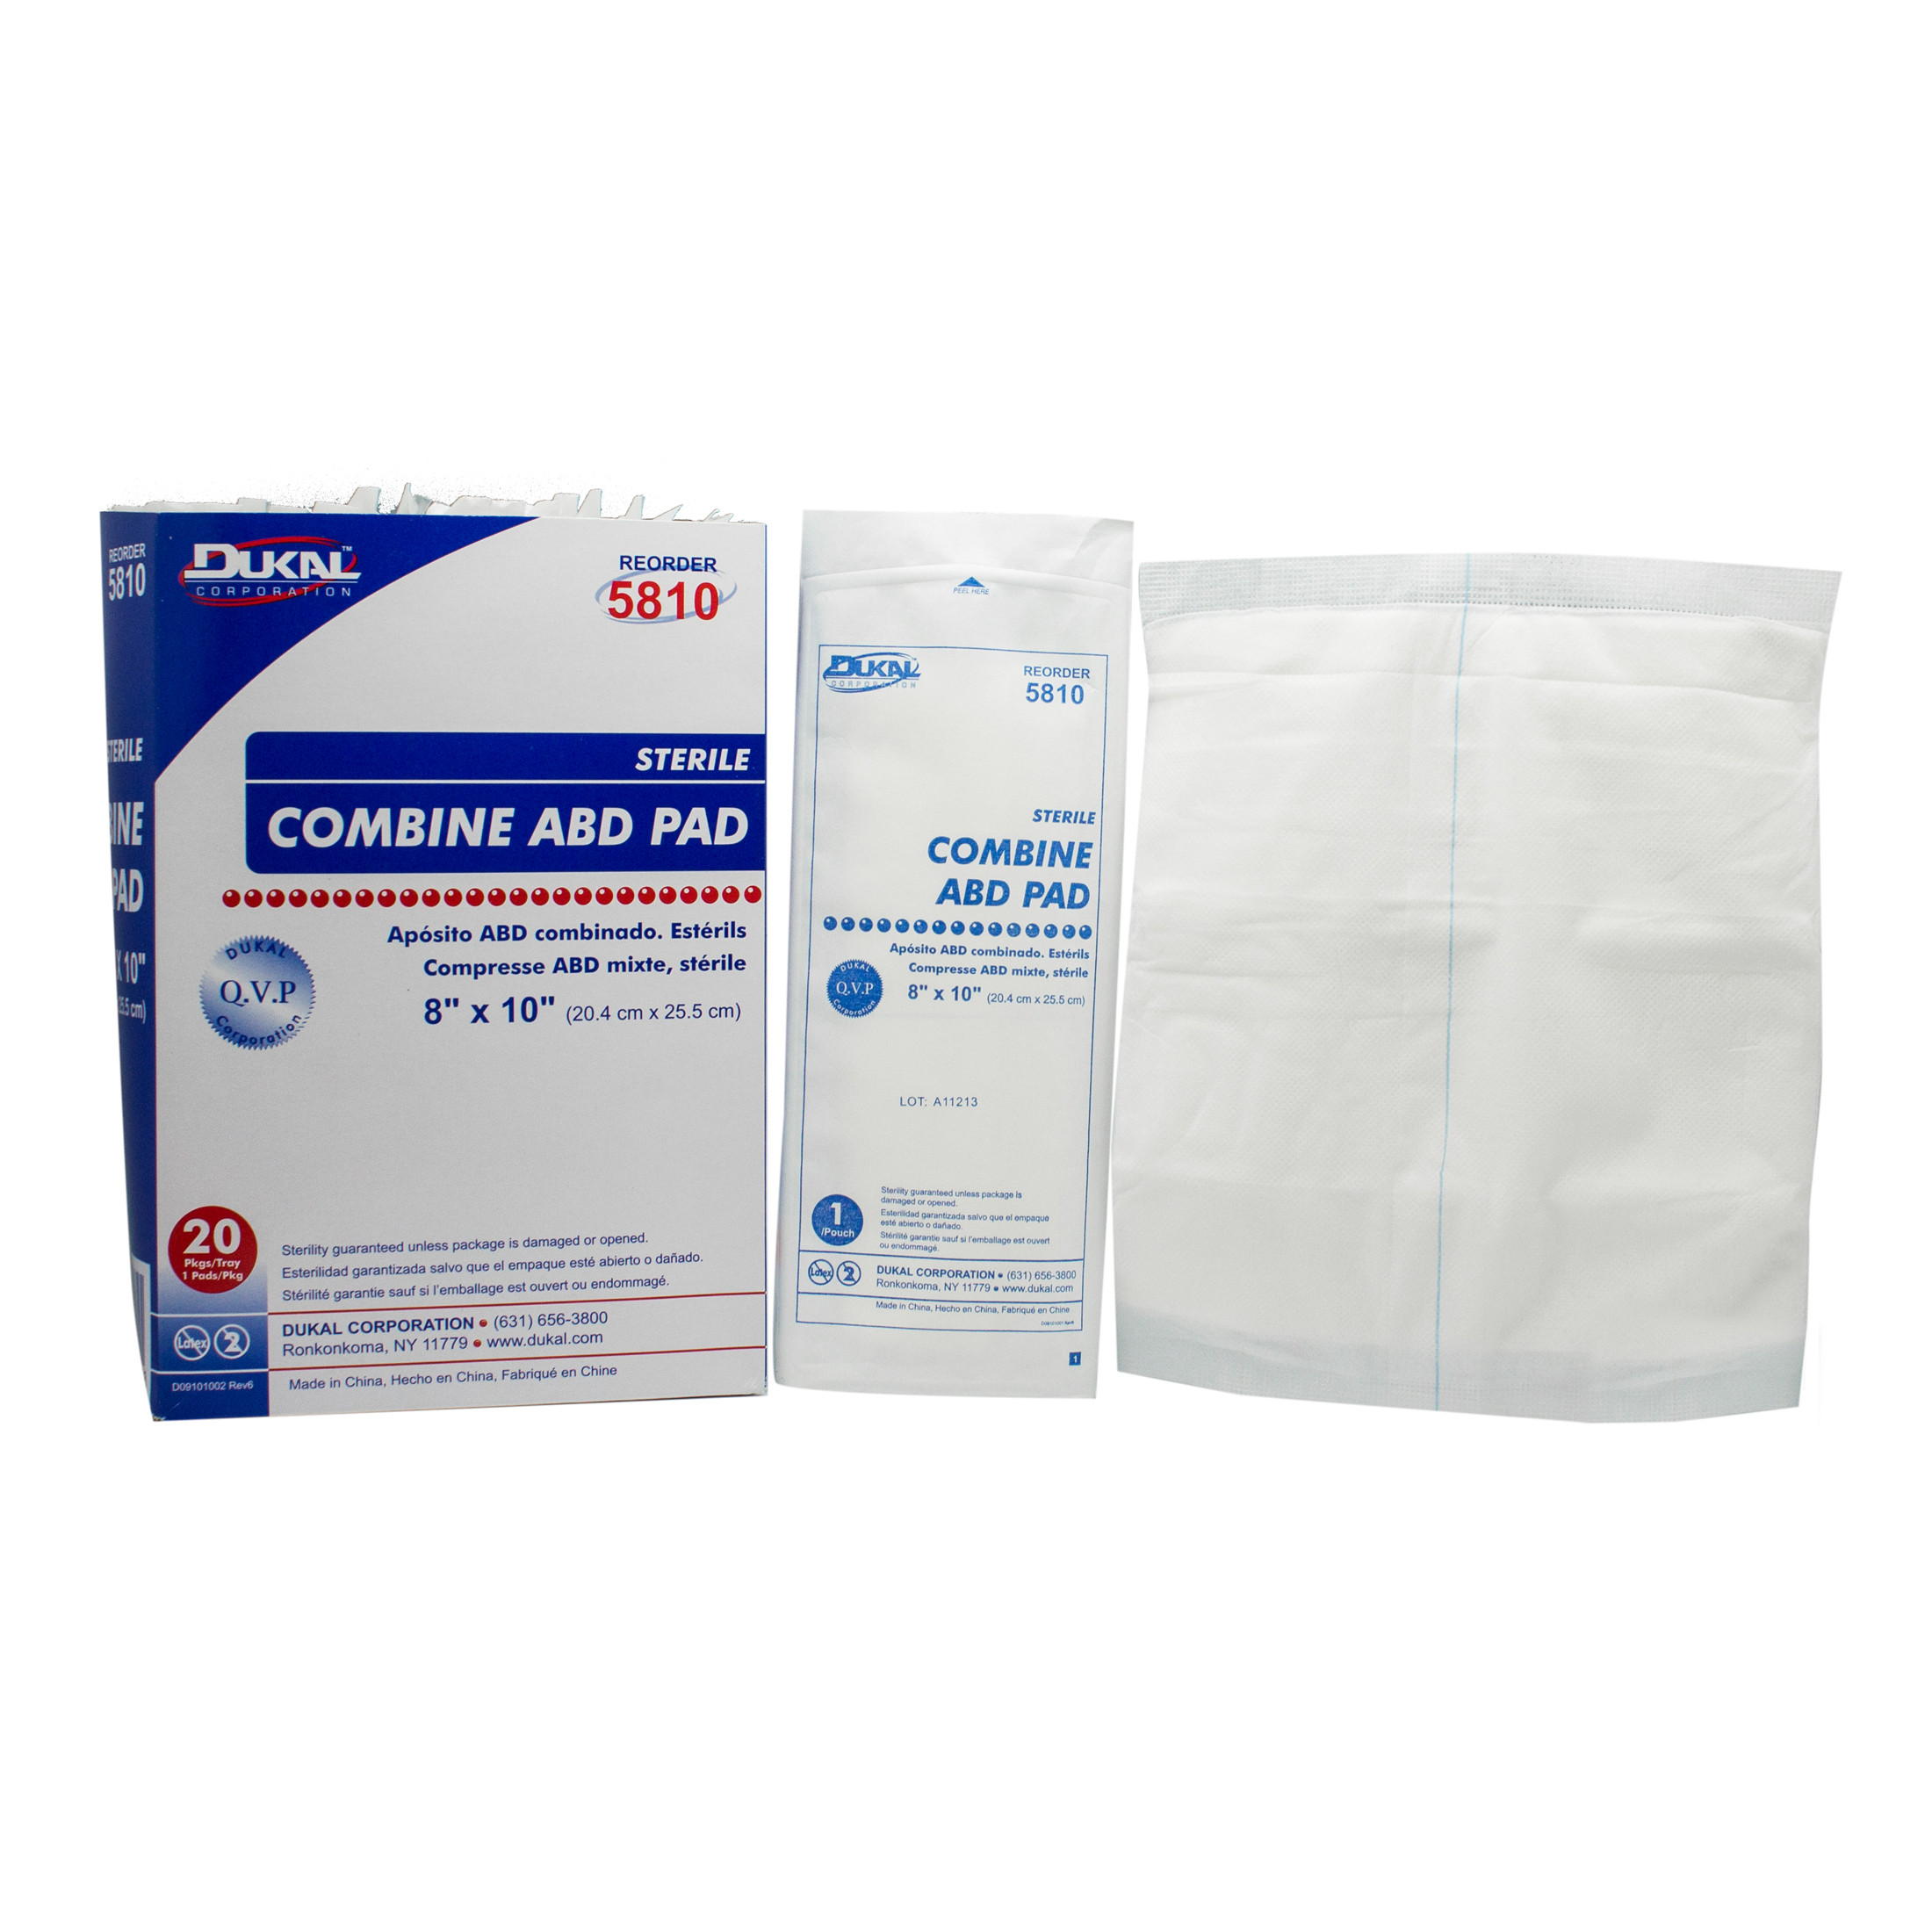 Abdominal Pad 8 X 10 Inch STERILE Case of 16 Trays # 5810